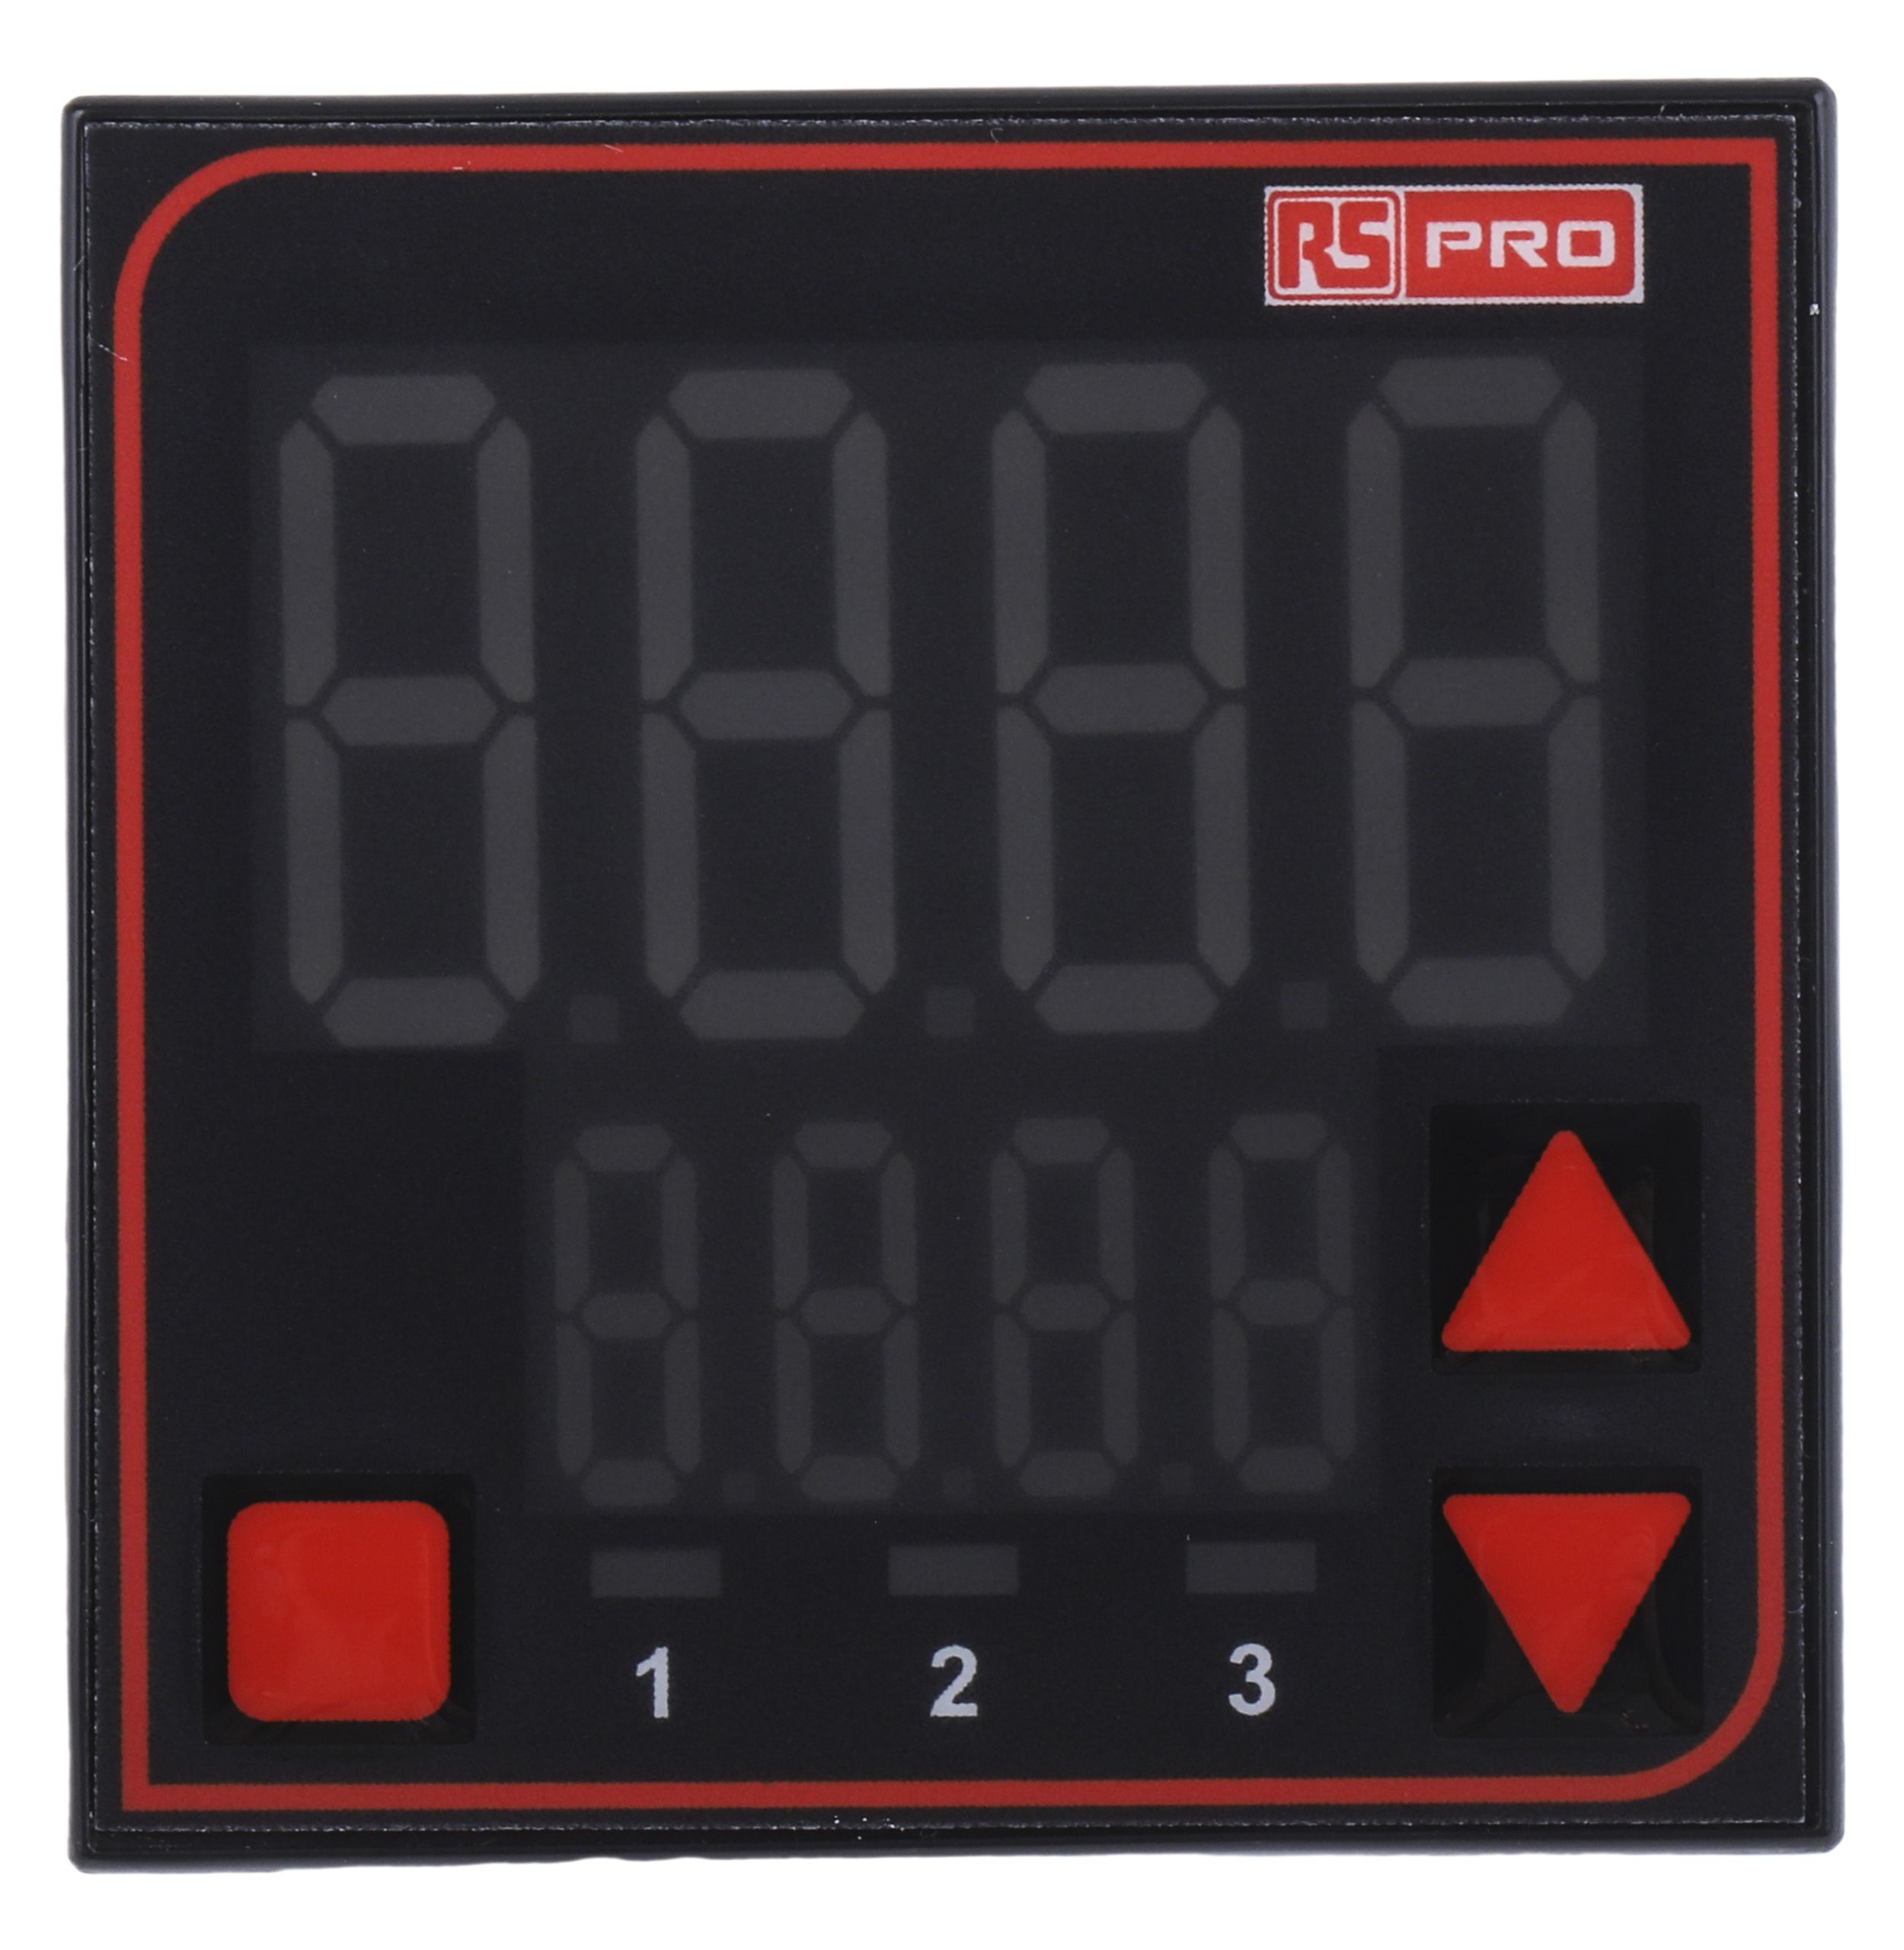 RS PRO Panel Mount PID Temperature Controller, 48 x 48mm, 2 Output Relay, SSR, 110 → 240 V ac Supply Voltage